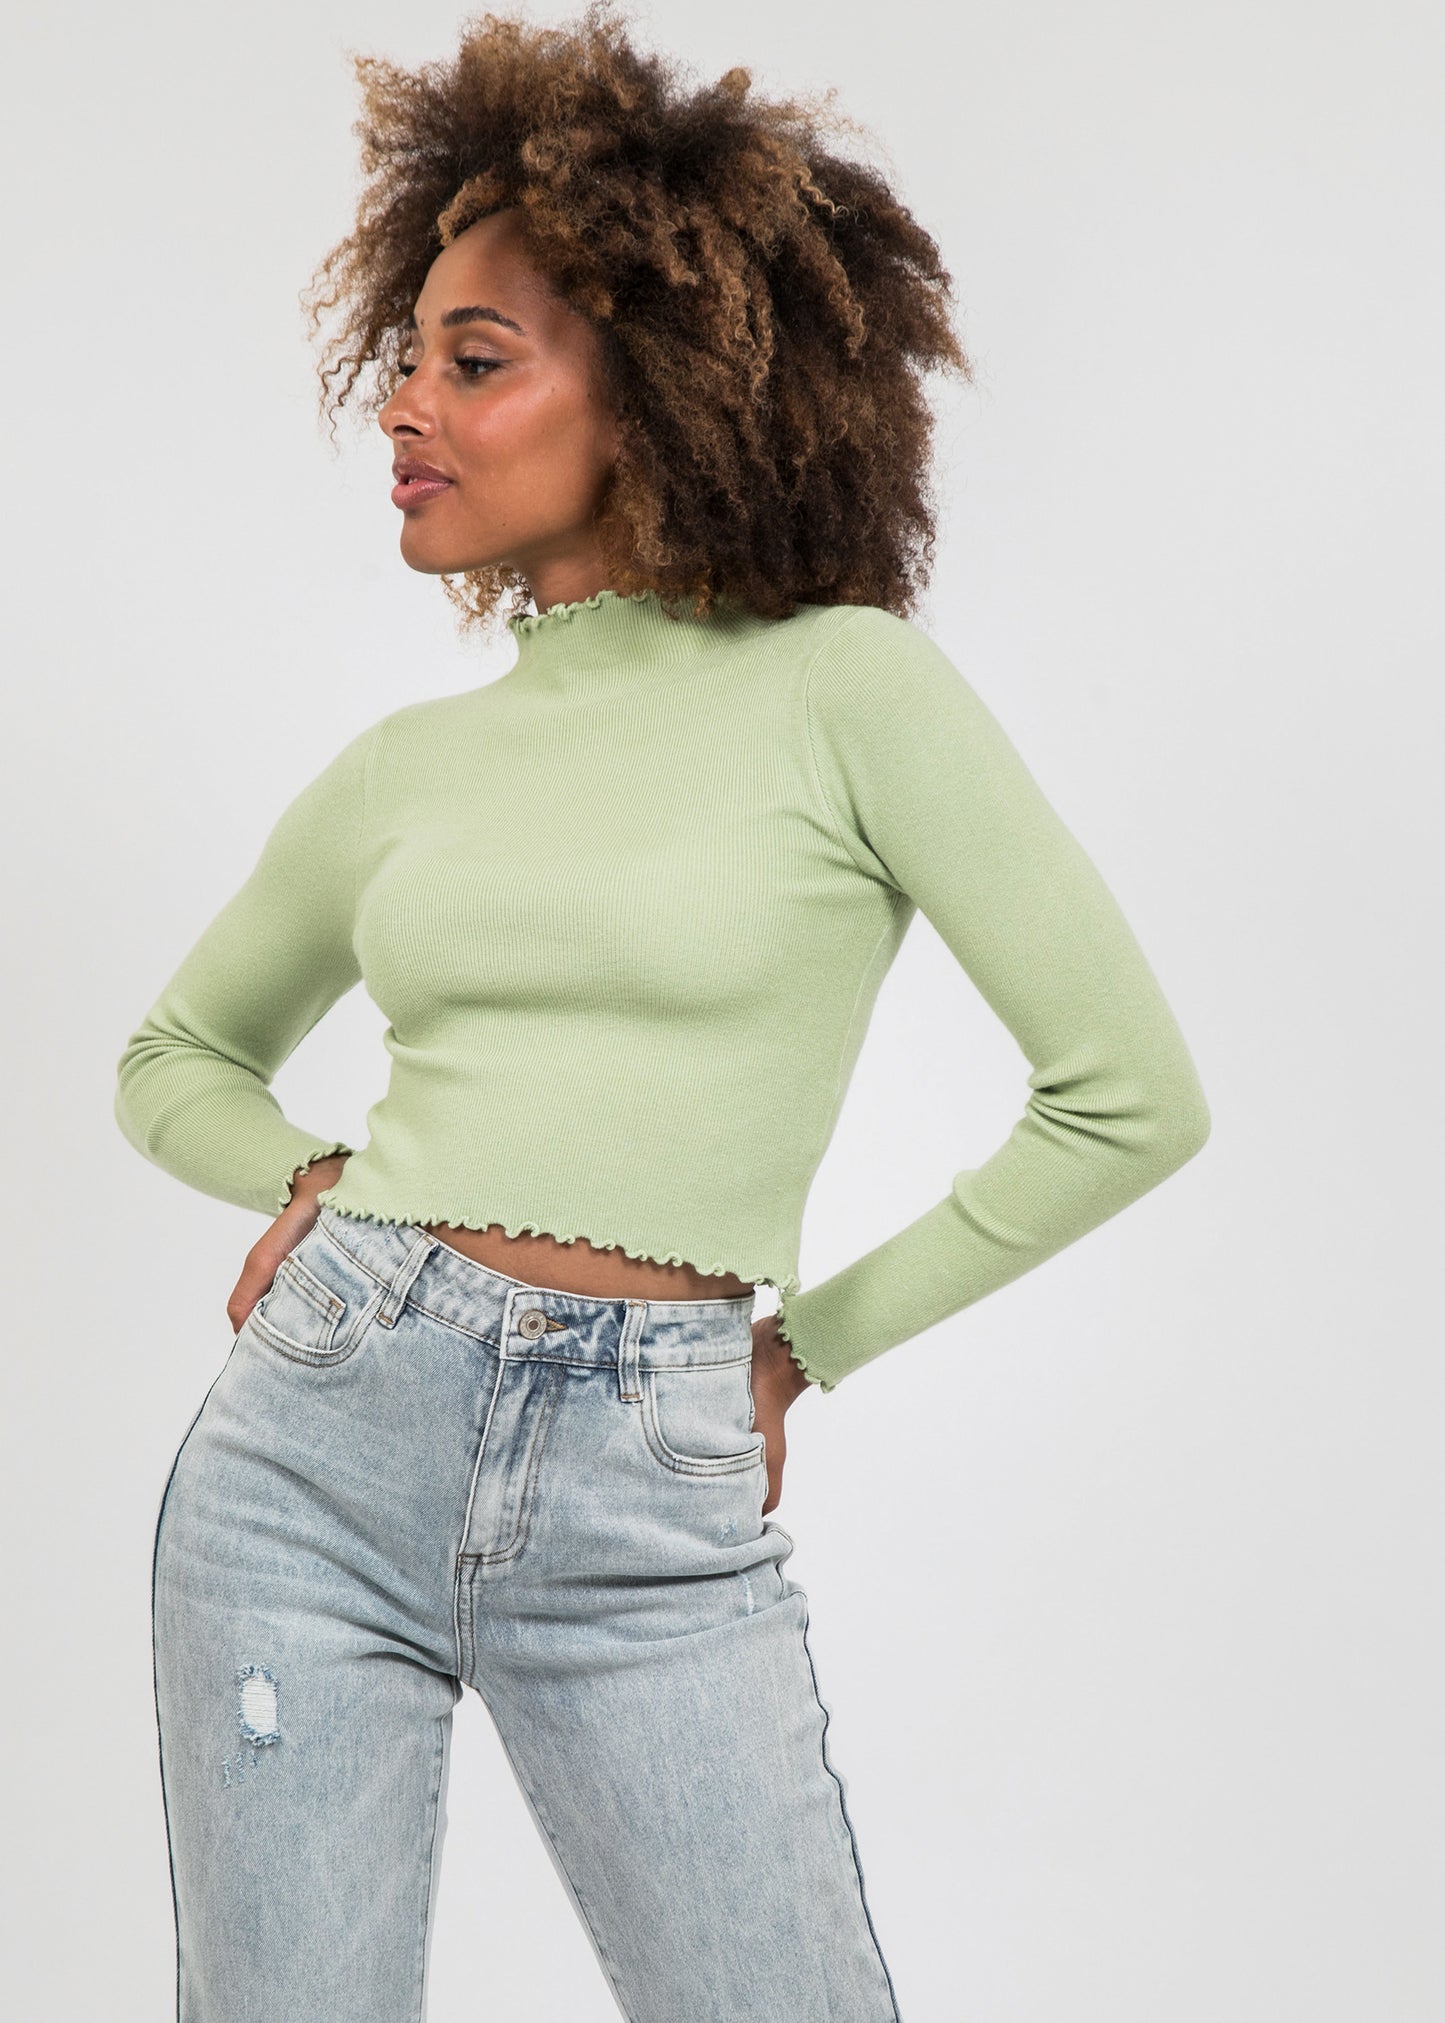 High neck jumper with ruffle hem in green